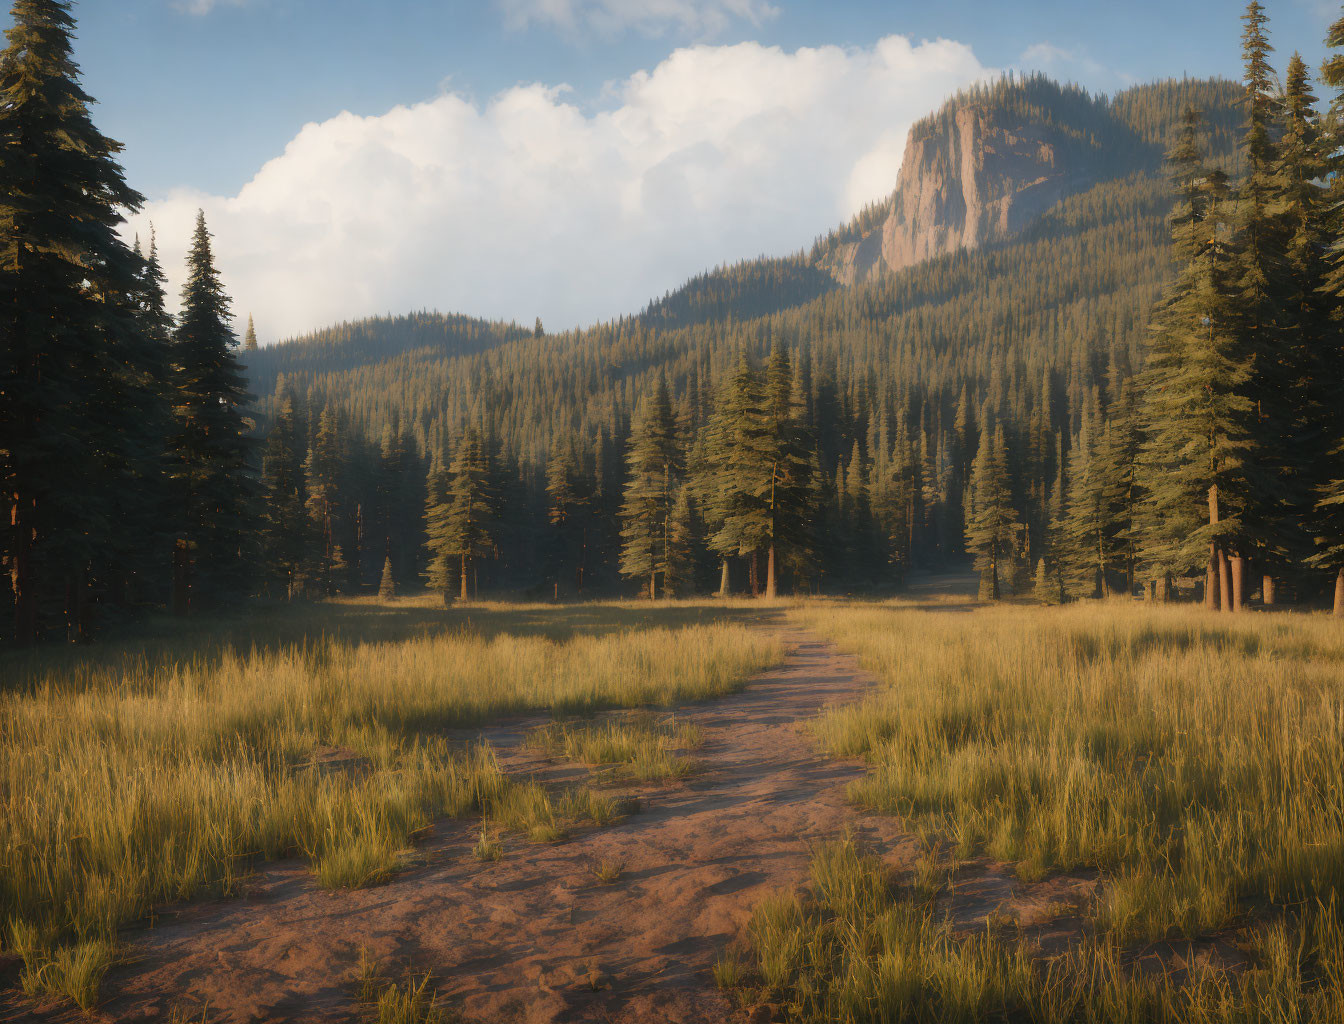 Tranquil forest landscape with dirt path, tall grass, pine trees, and mountain